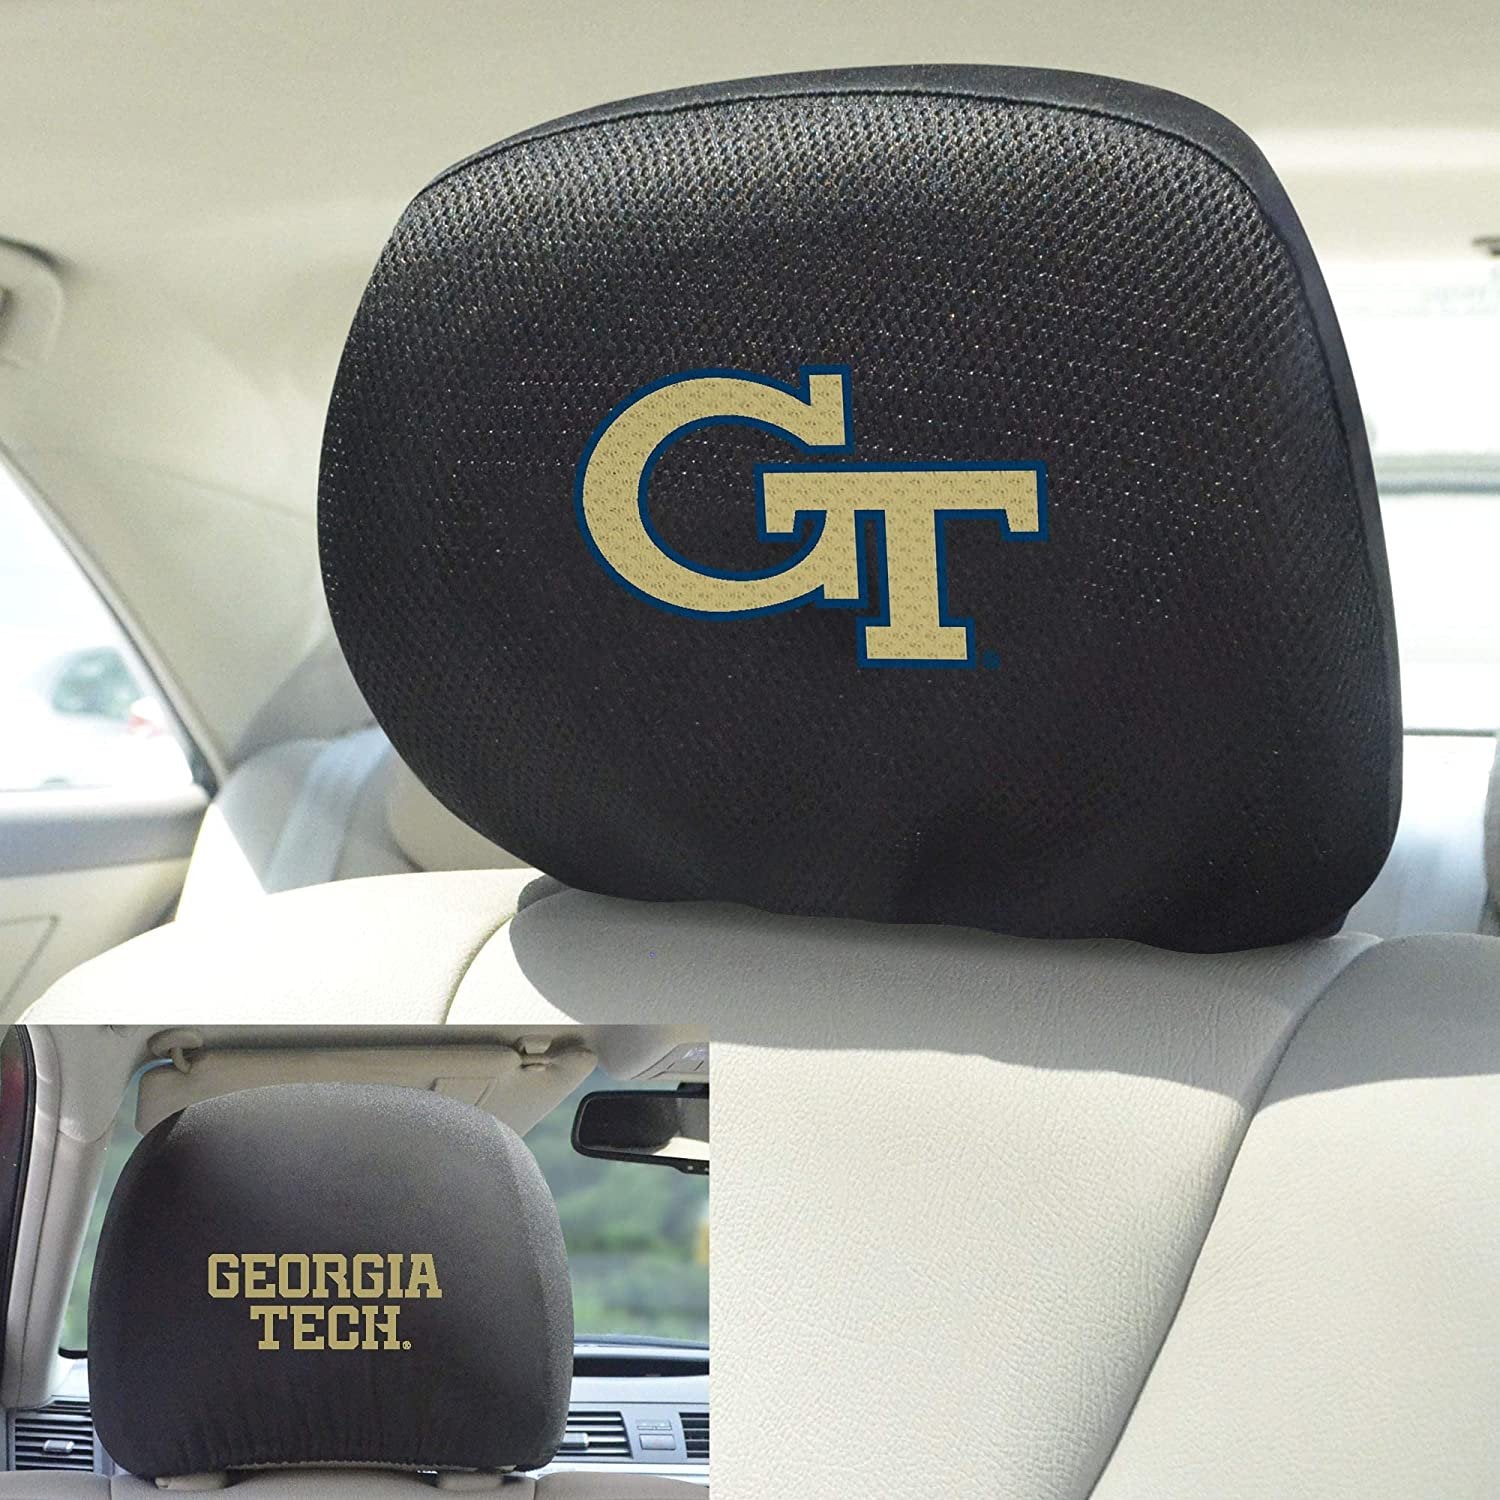 Georgia Tech Yellow Jackets Pair of Premium Auto Head Rest Covers, Embroidered, Black Elastic, 14x10 Inch